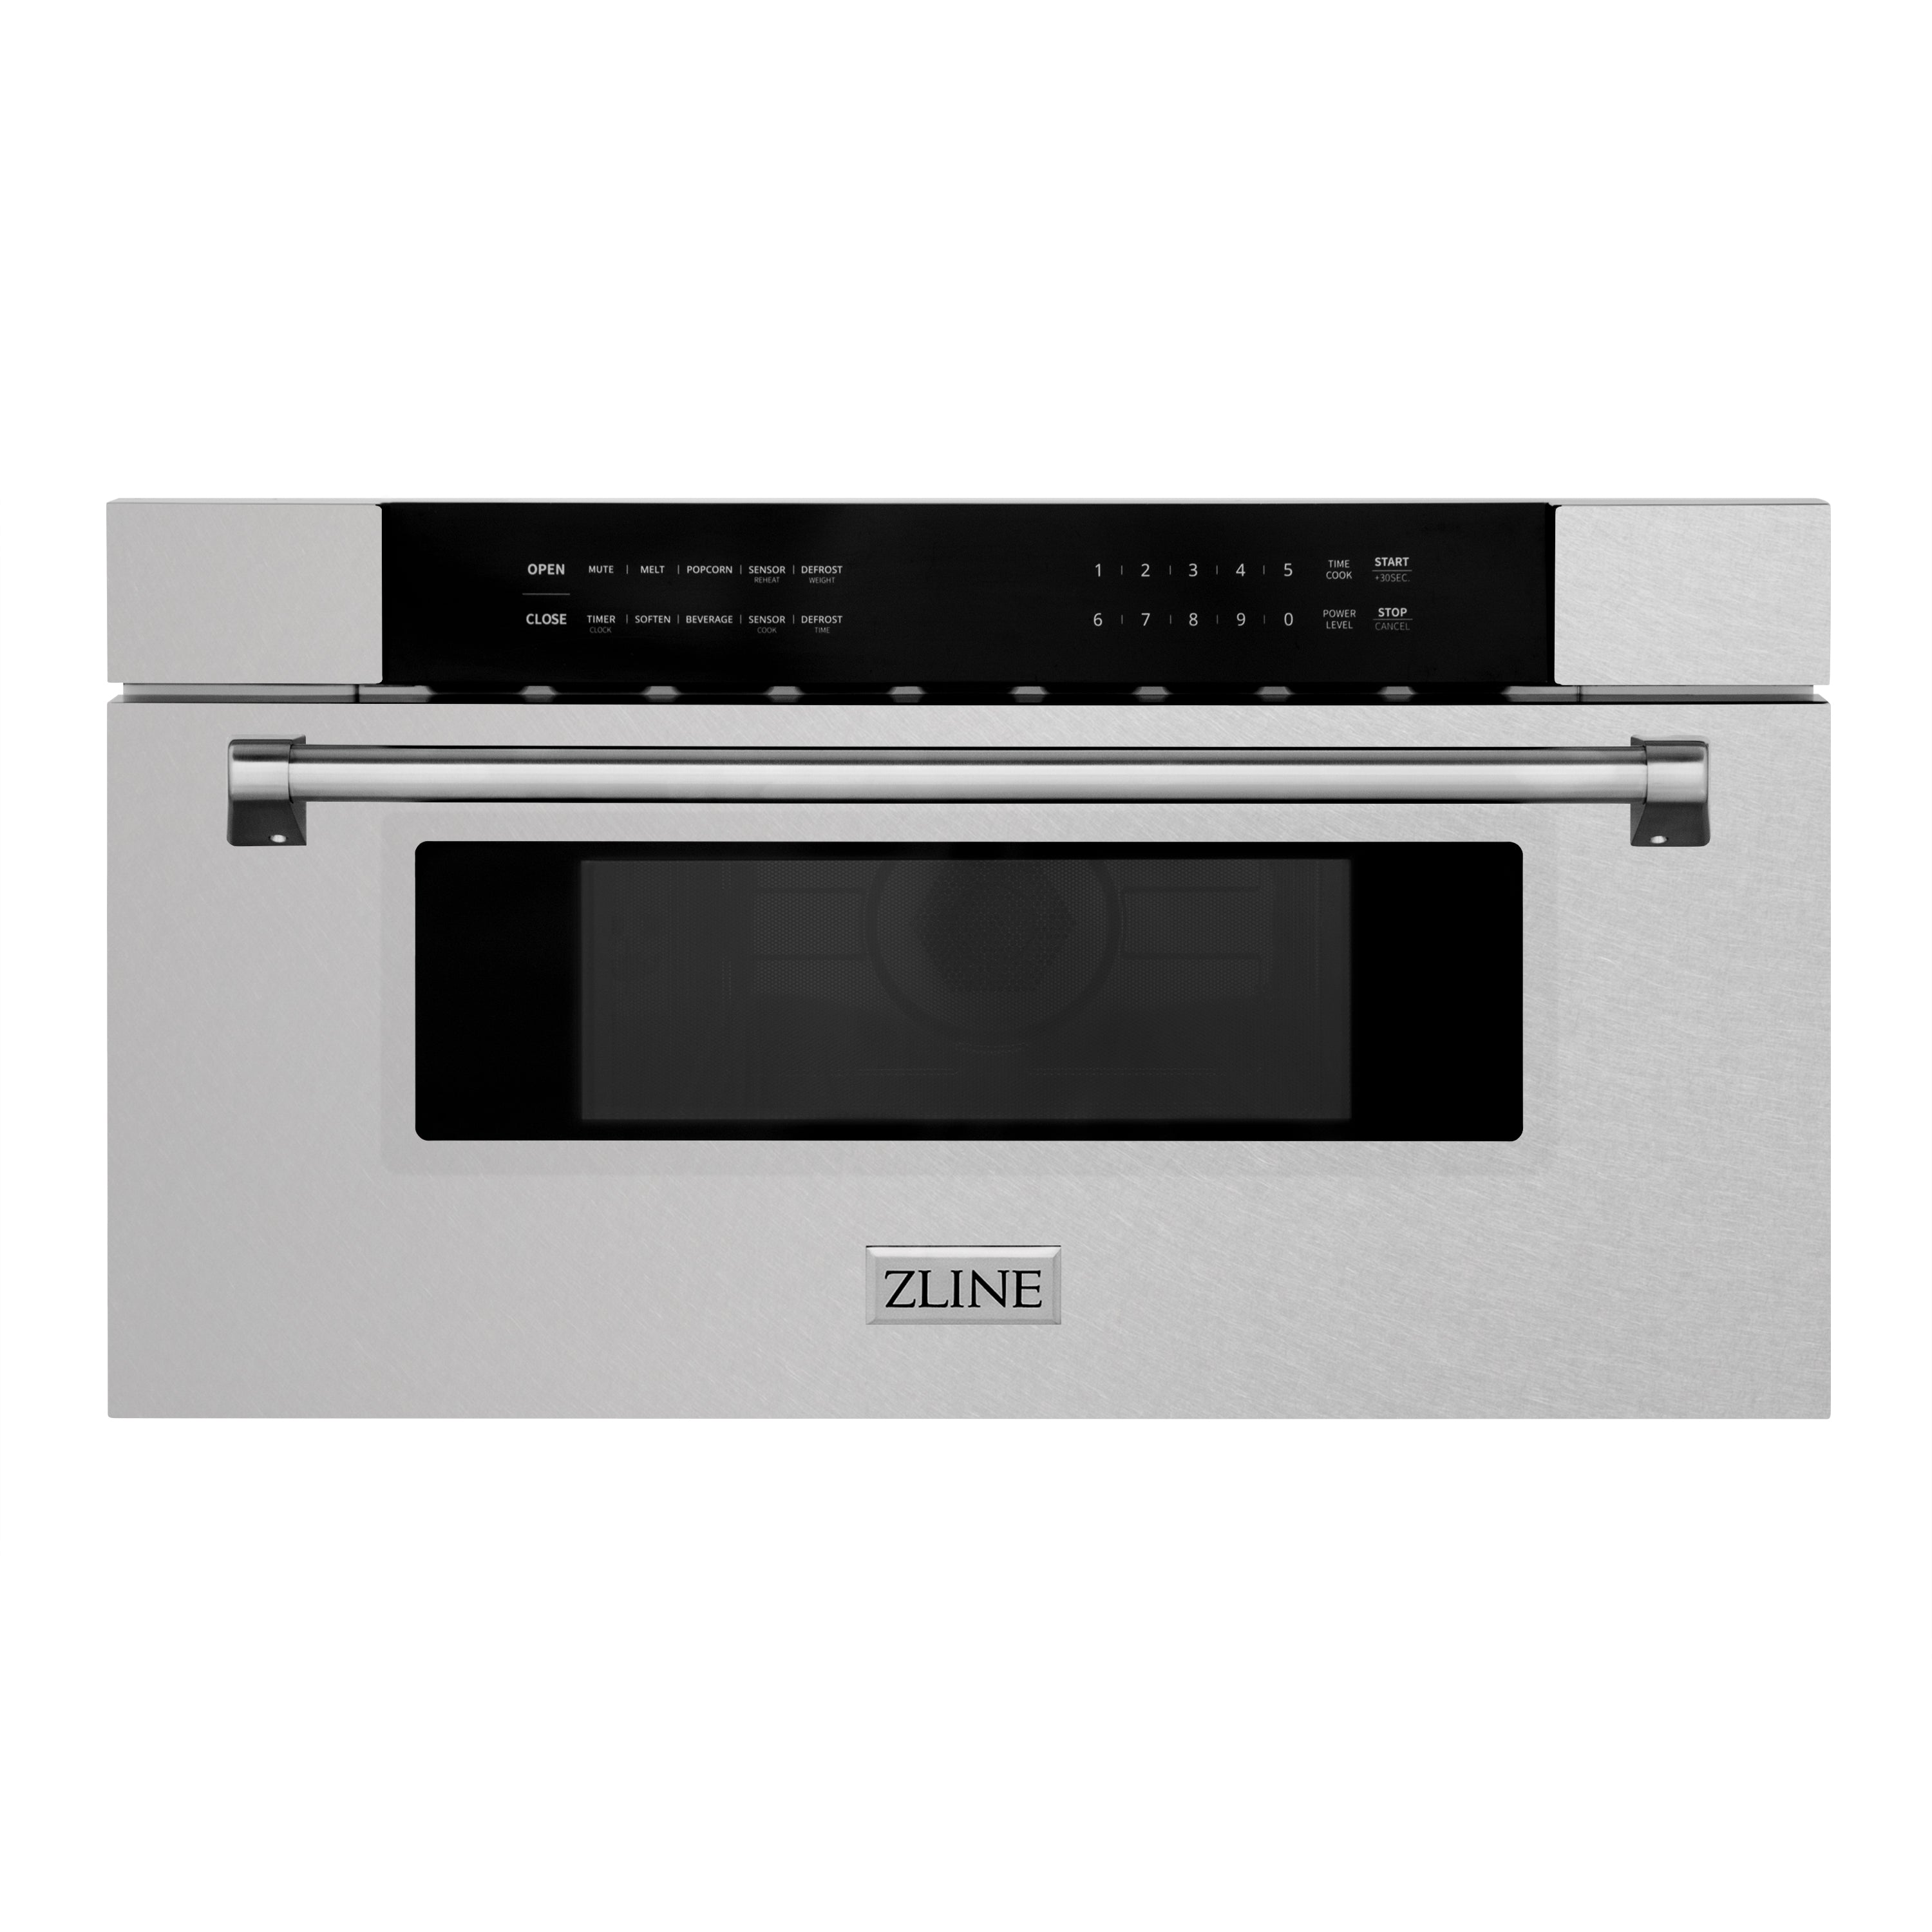 ZLINE 30 in. 1.2 cu. ft. Built-In Microwave Drawer in DuraSnow Stainless Steel (MWD-30-SS) Front View Drawer Closed